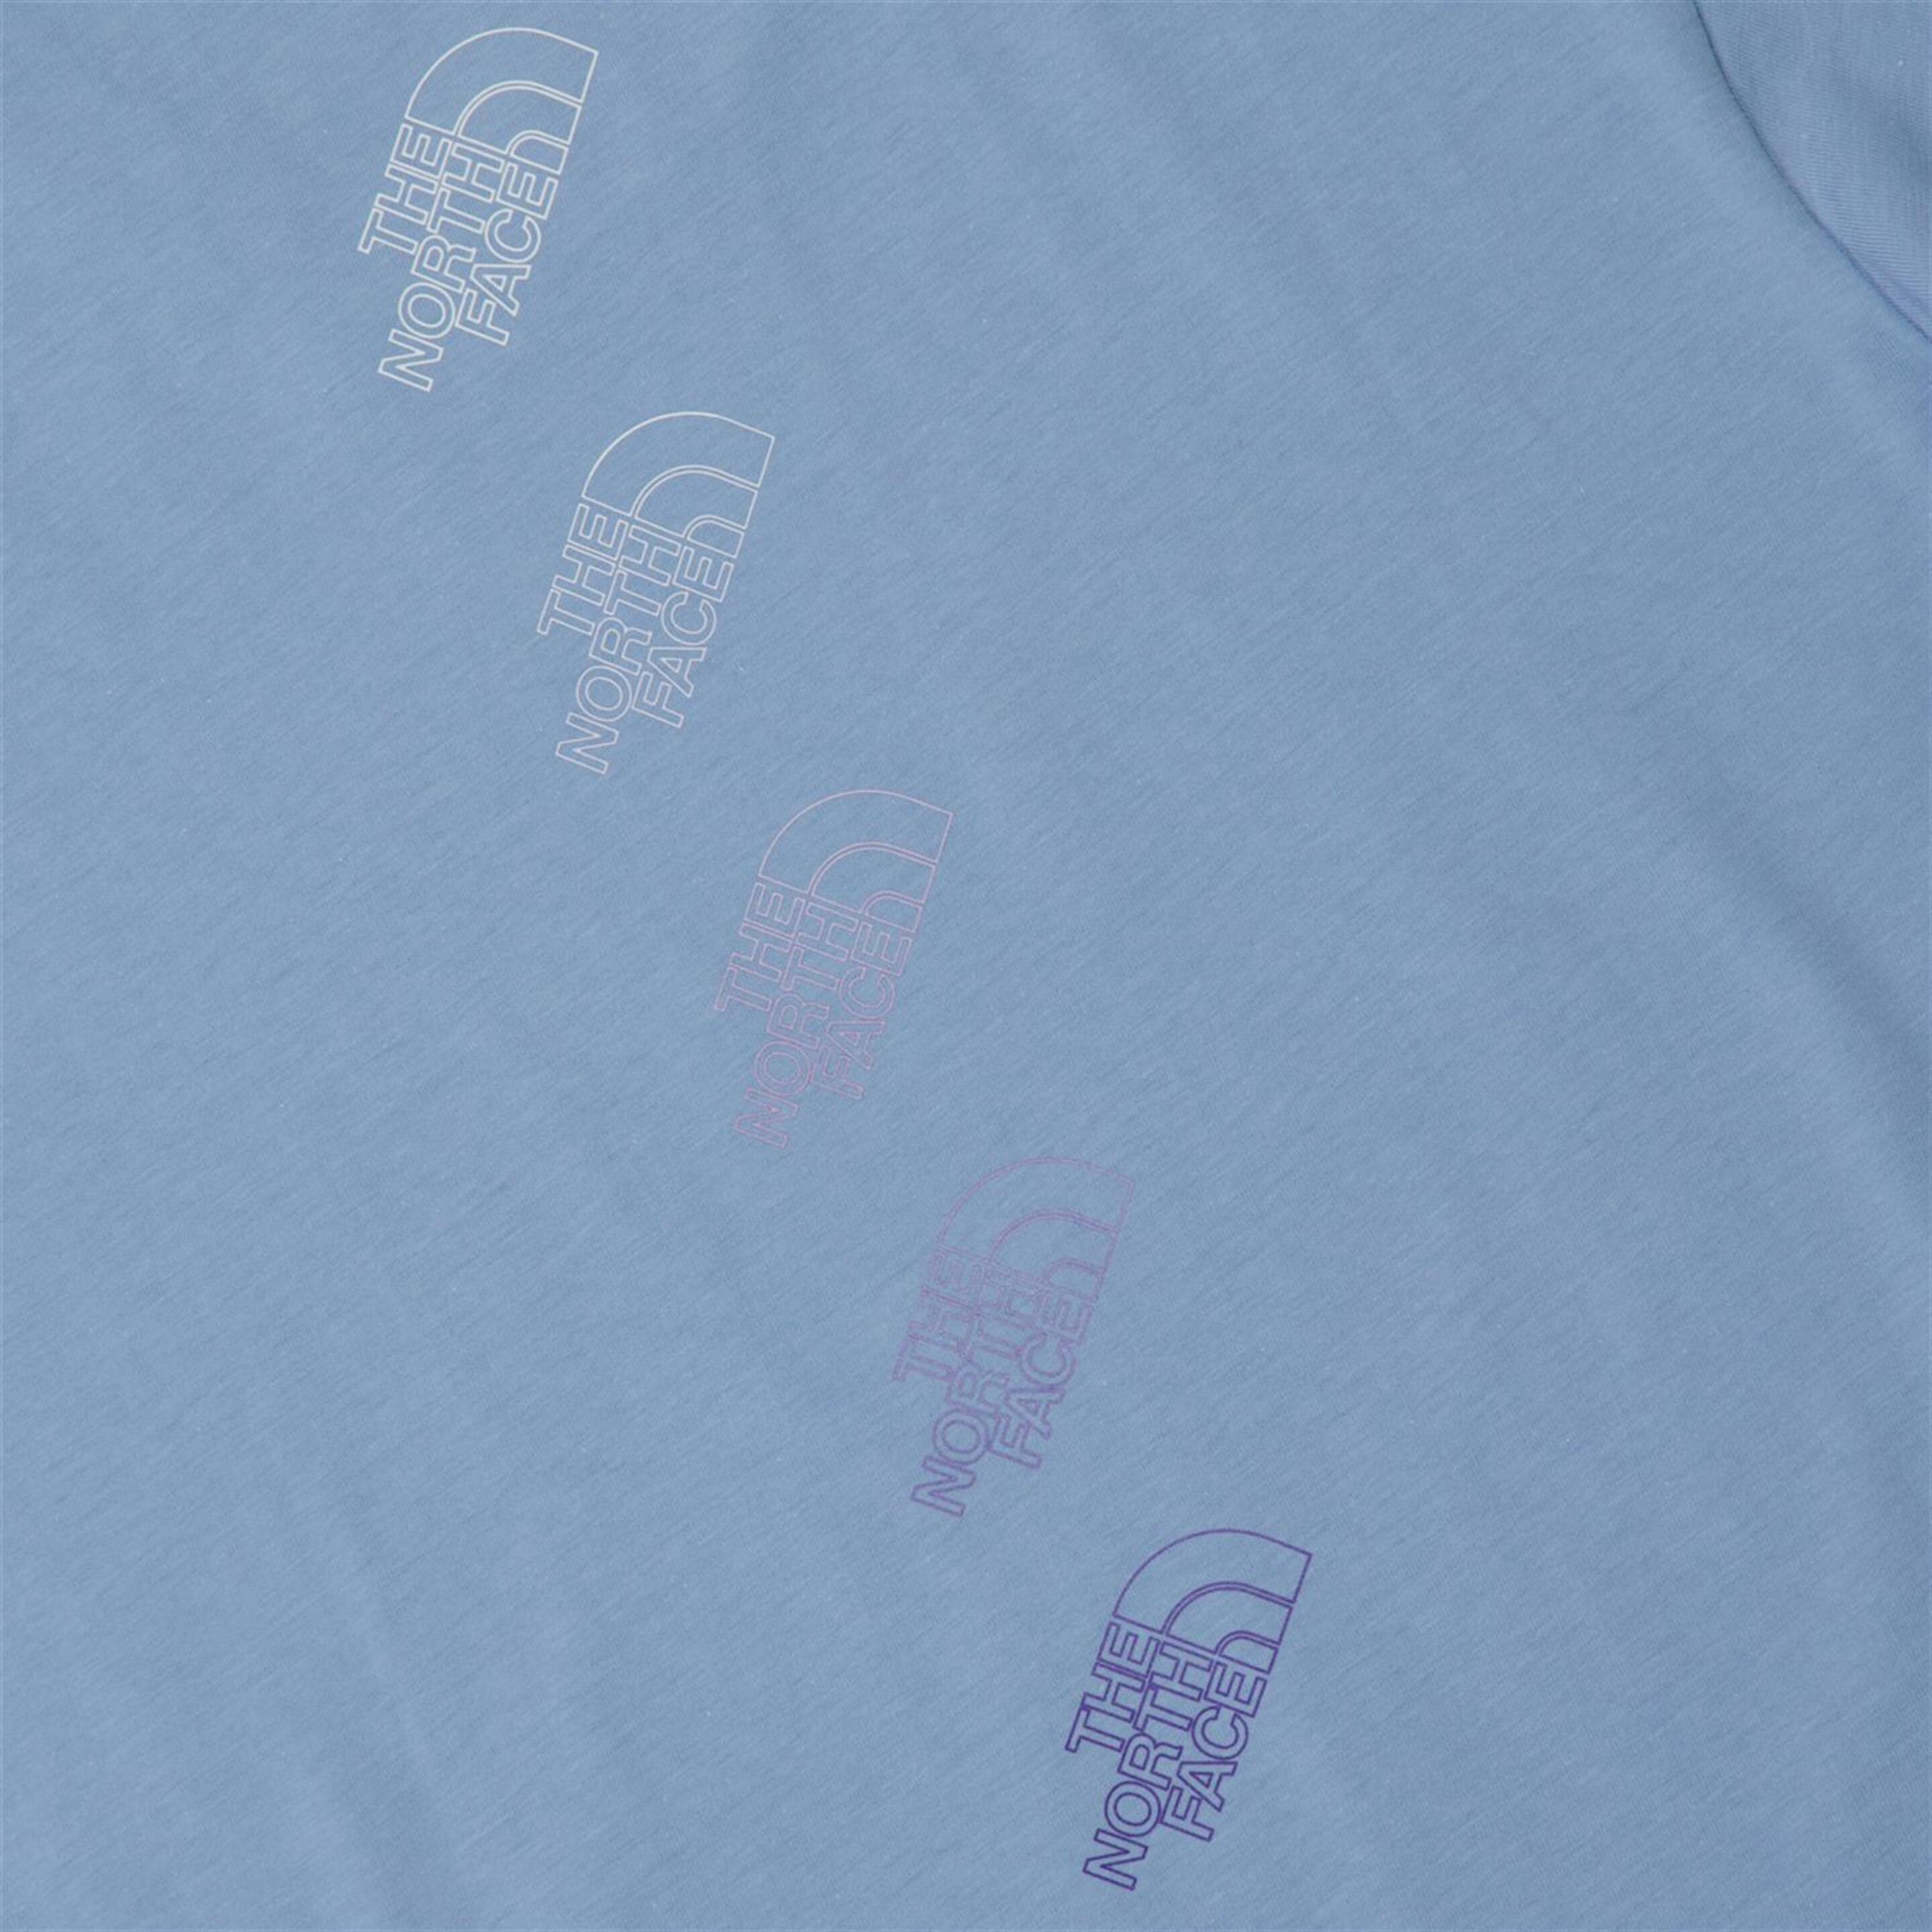 The North Face Relaxed Graphic 2